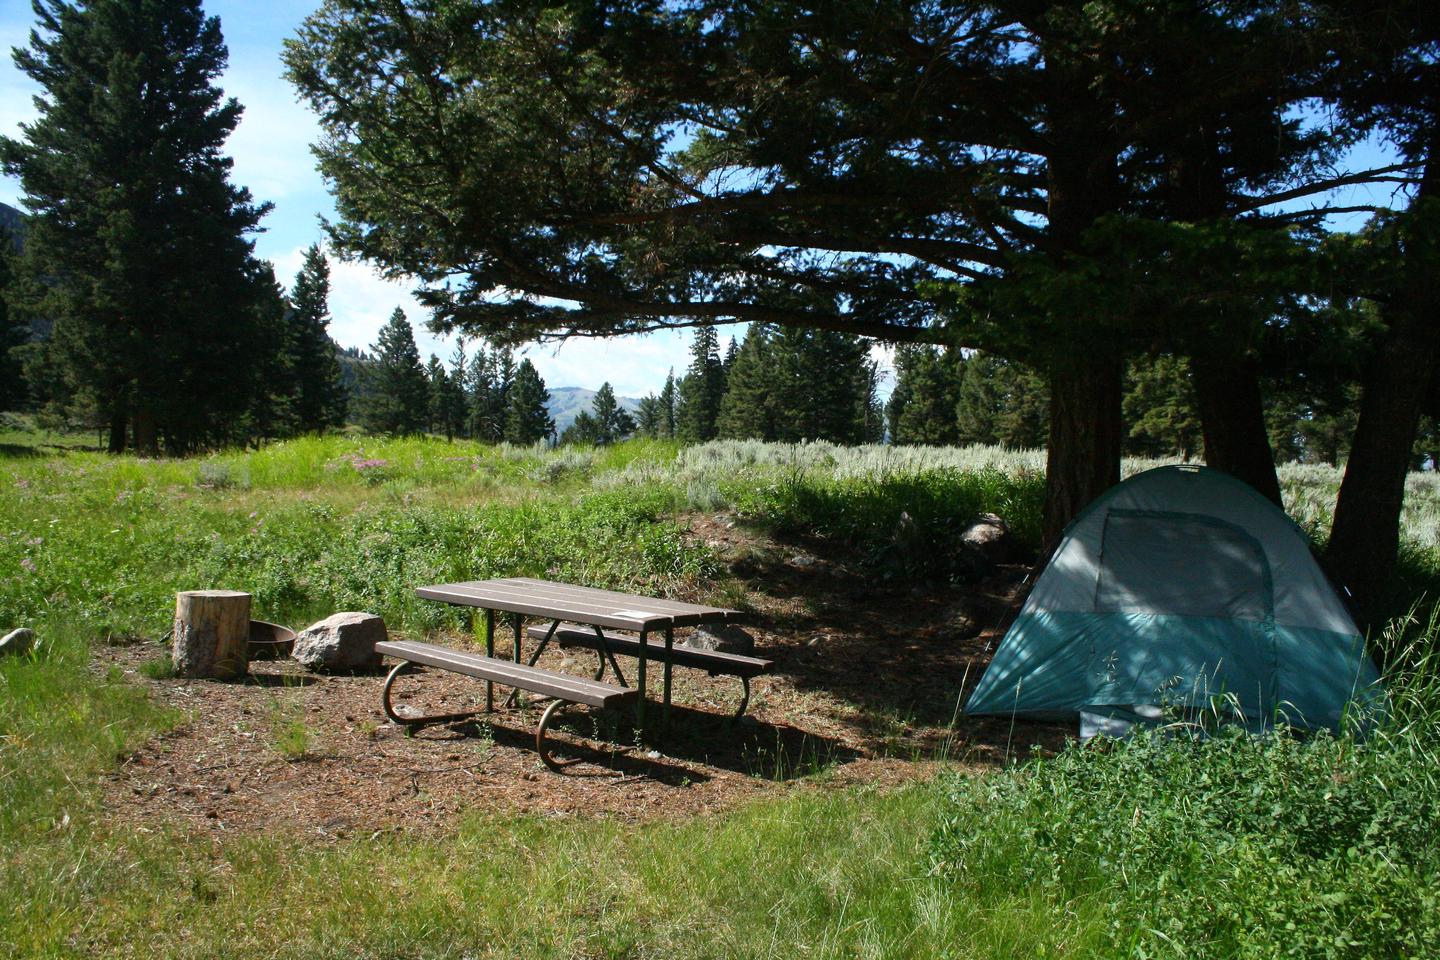 Slough Creek Campground Site #8...Slough Creek Campground Site #8